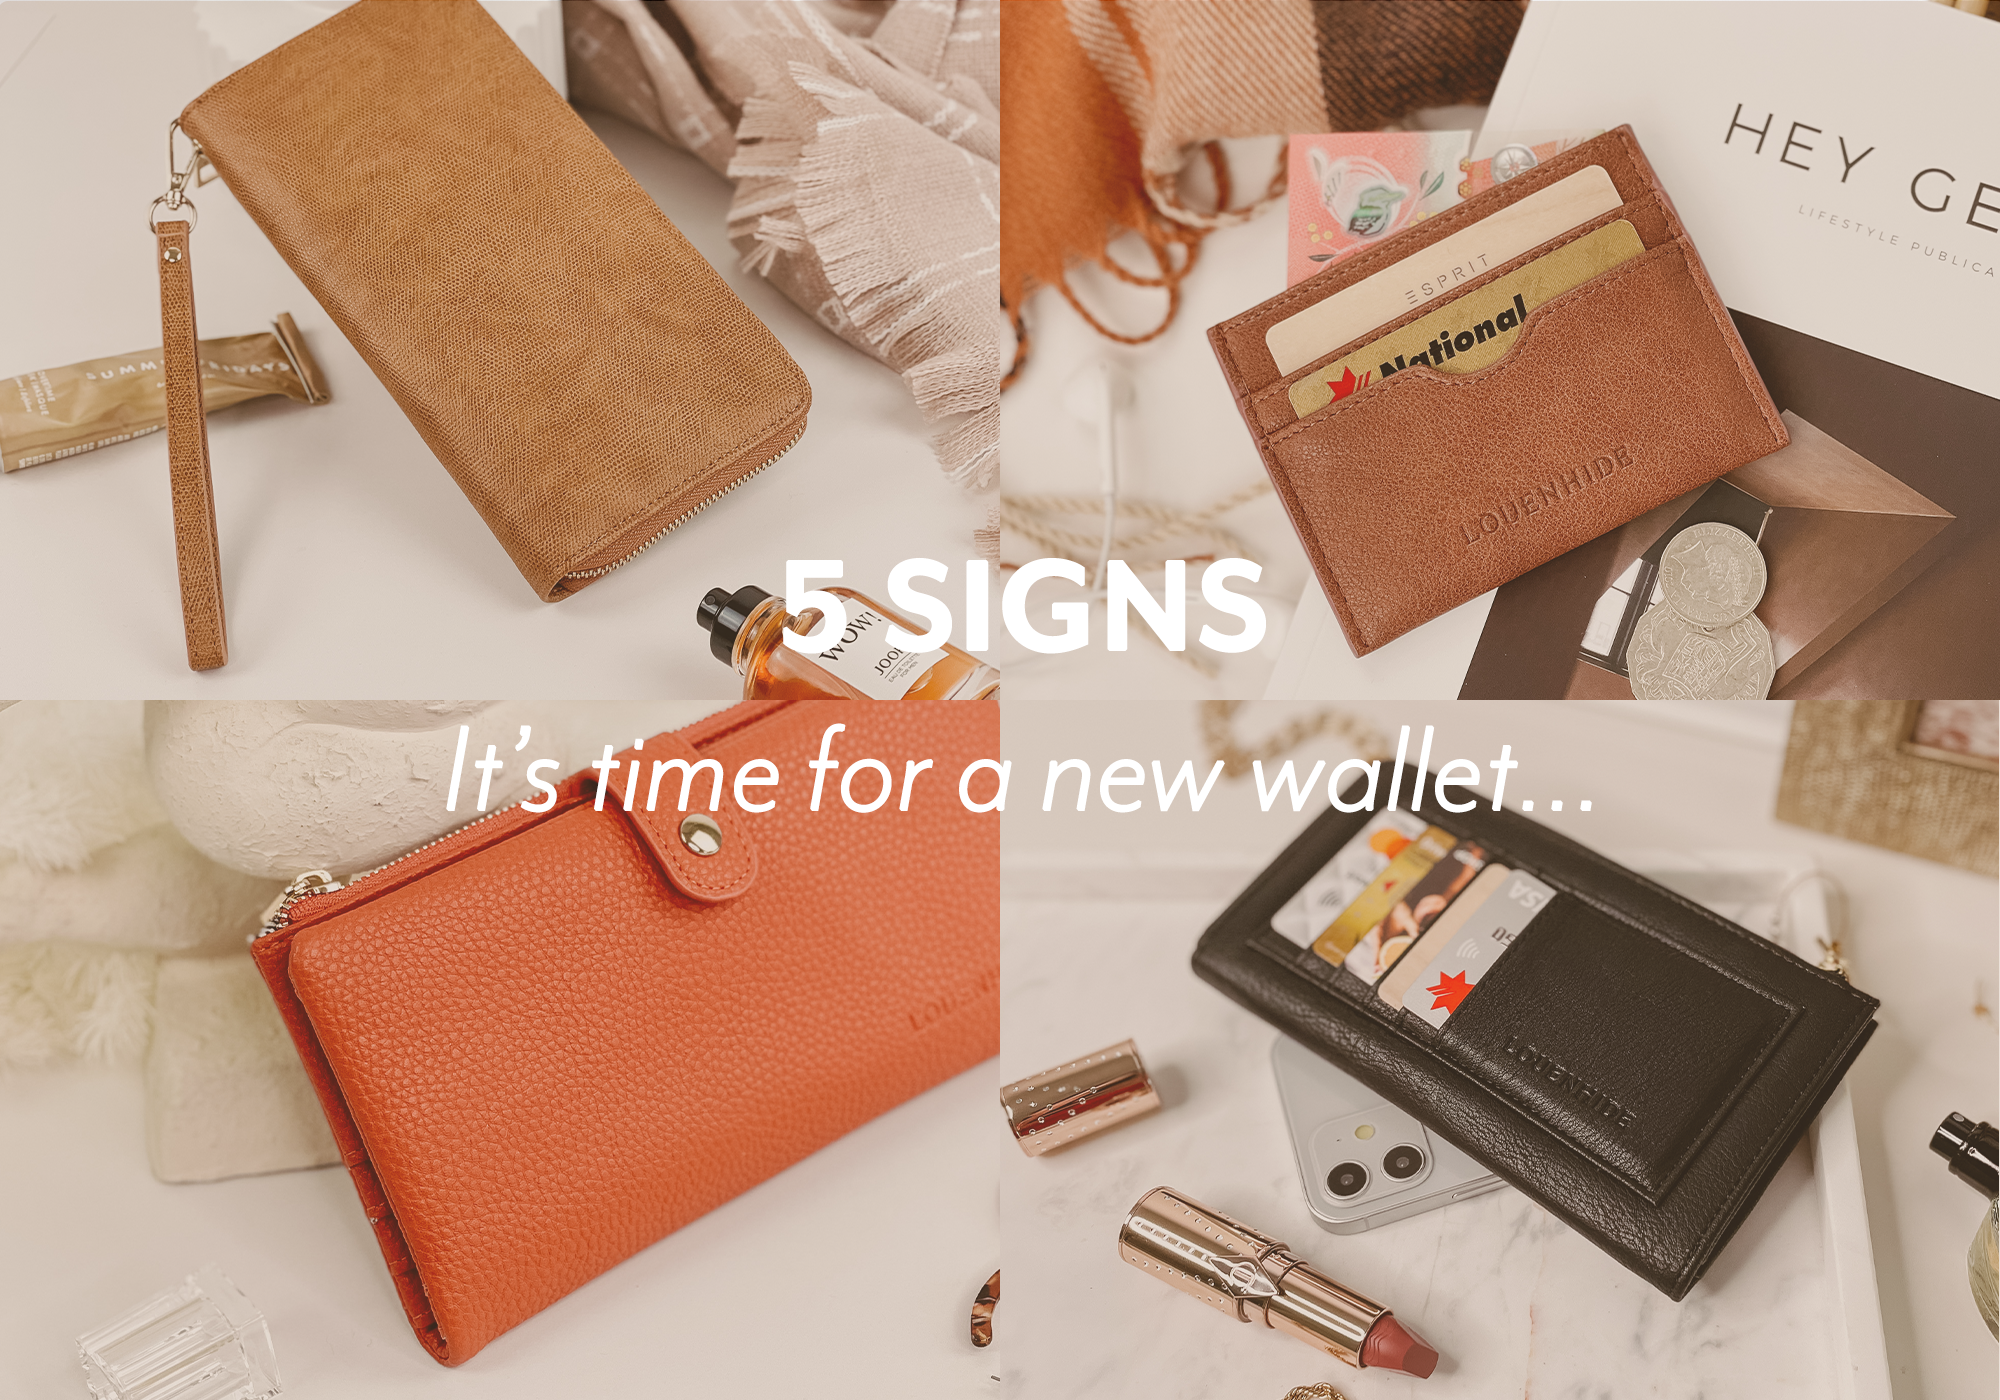 5 Signs It's Time For a New Wallet